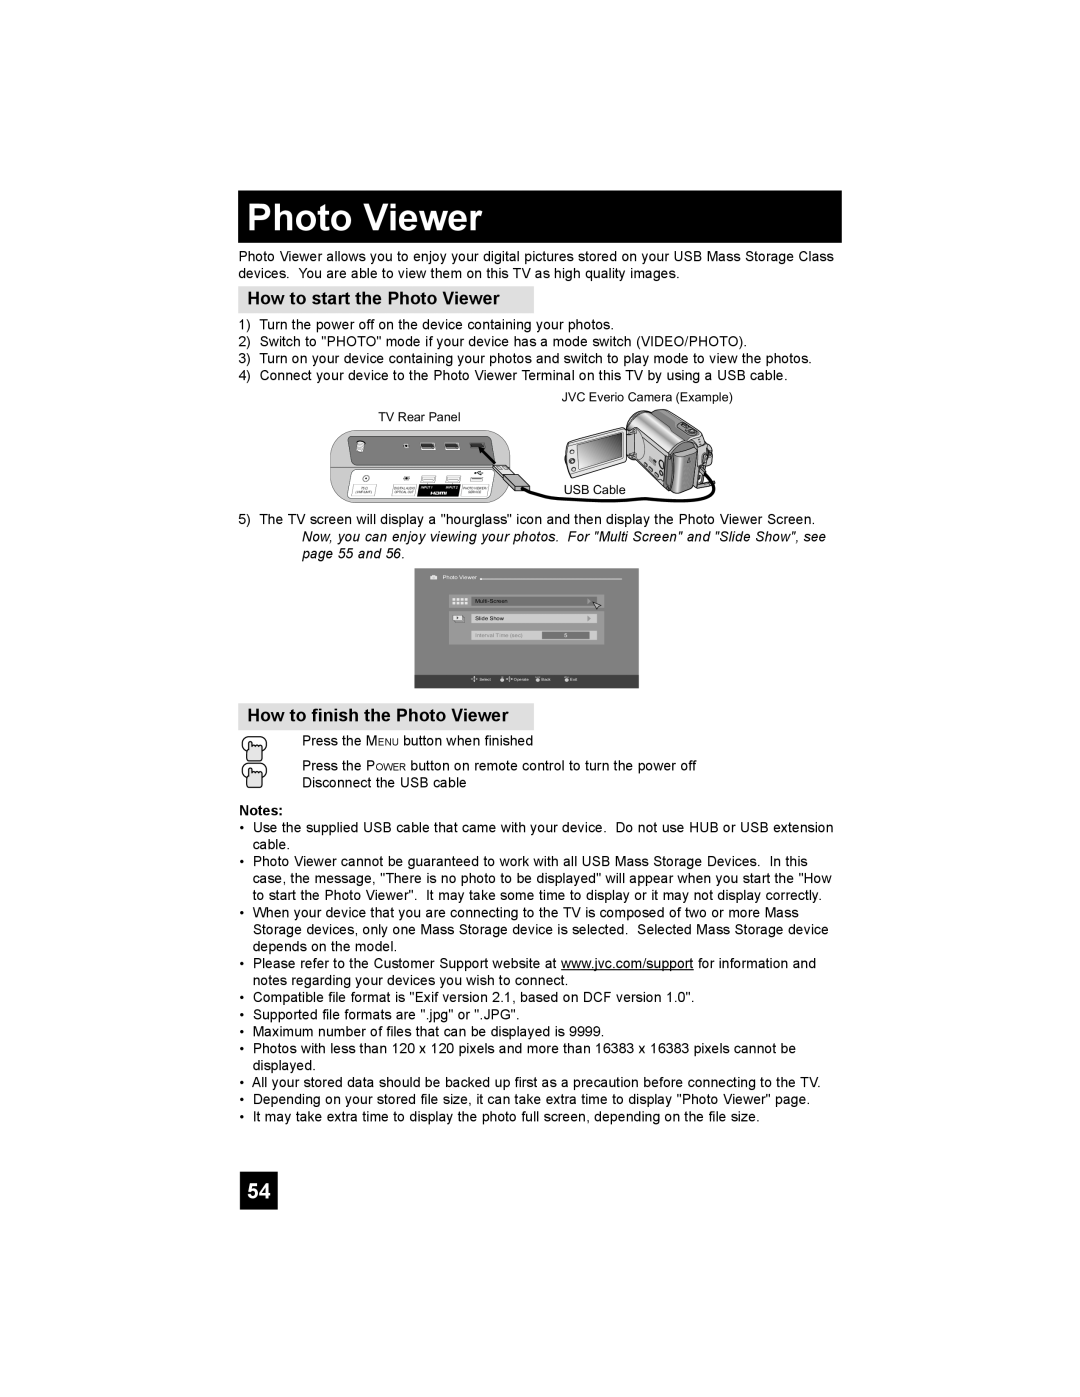 JVC LT-42EX38, LT-37EX38, LT-32EX38 manual How to start the Photo Viewer, How to finish the Photo Viewer 